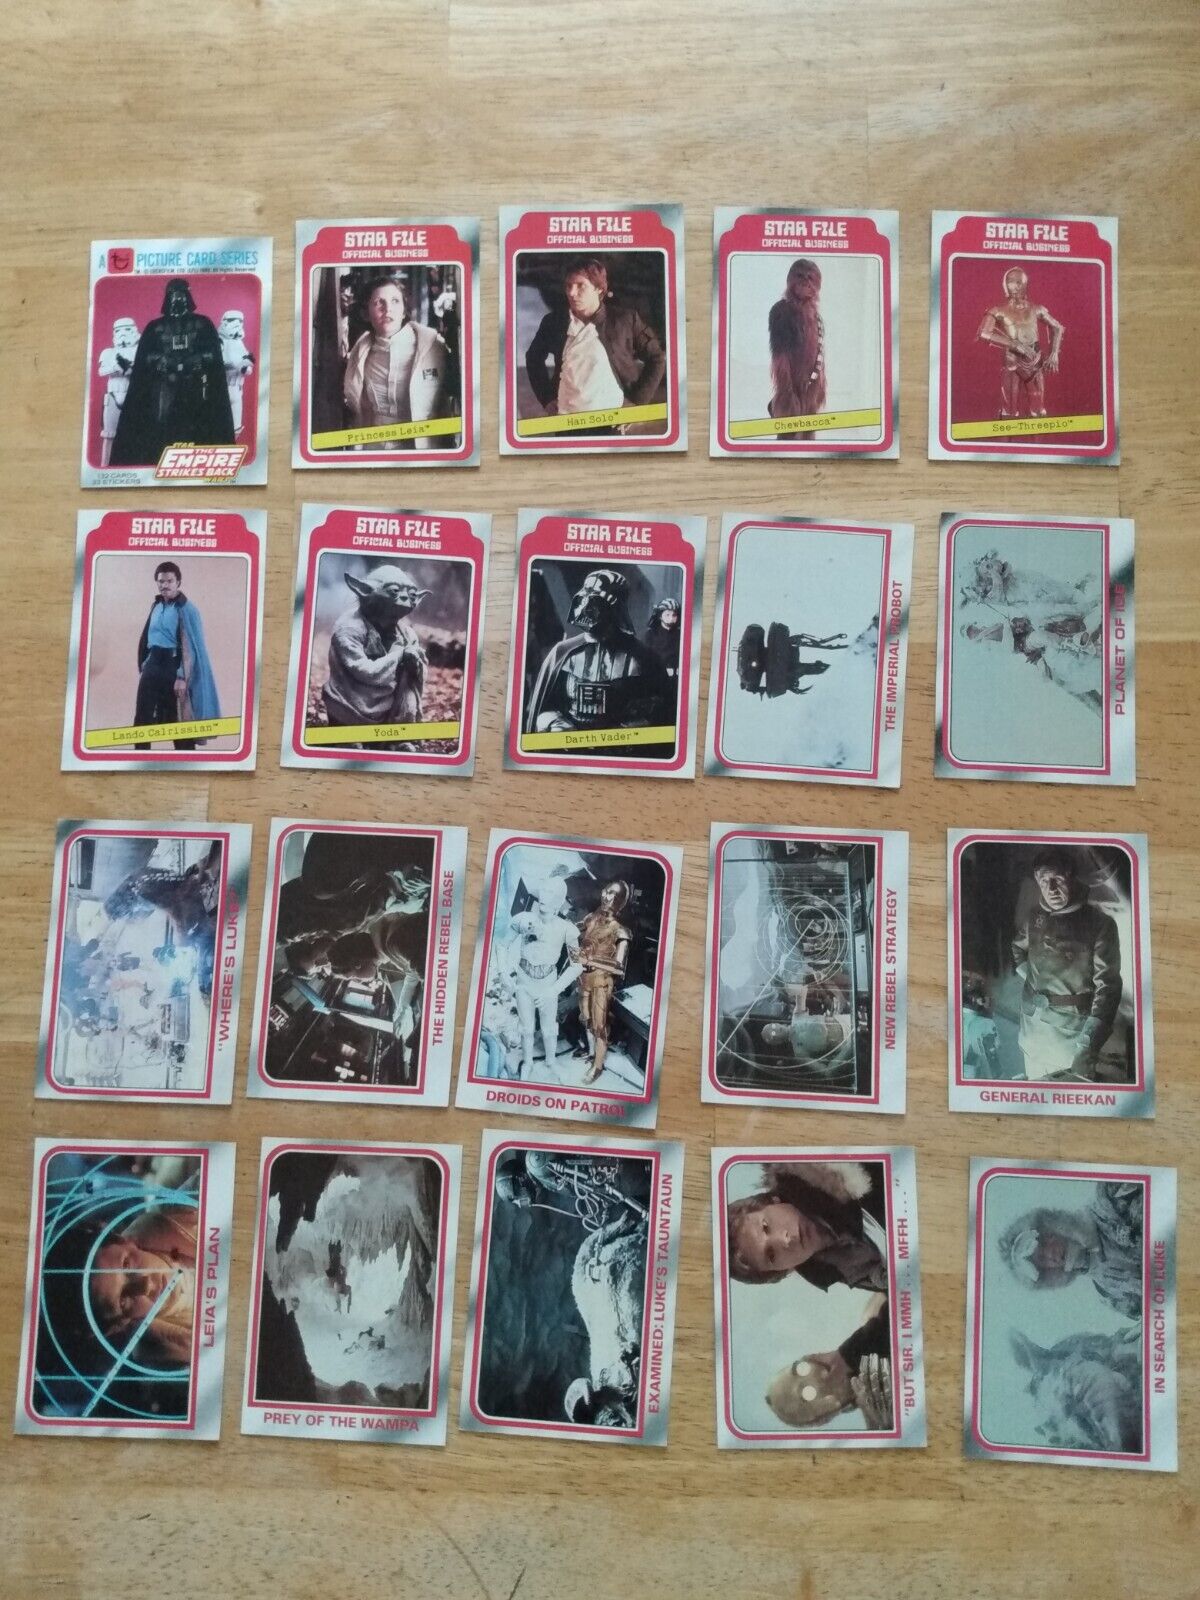 1980 Empire Strikes Back Series # 1 Near Complete Card Set - Missing 3 Cards